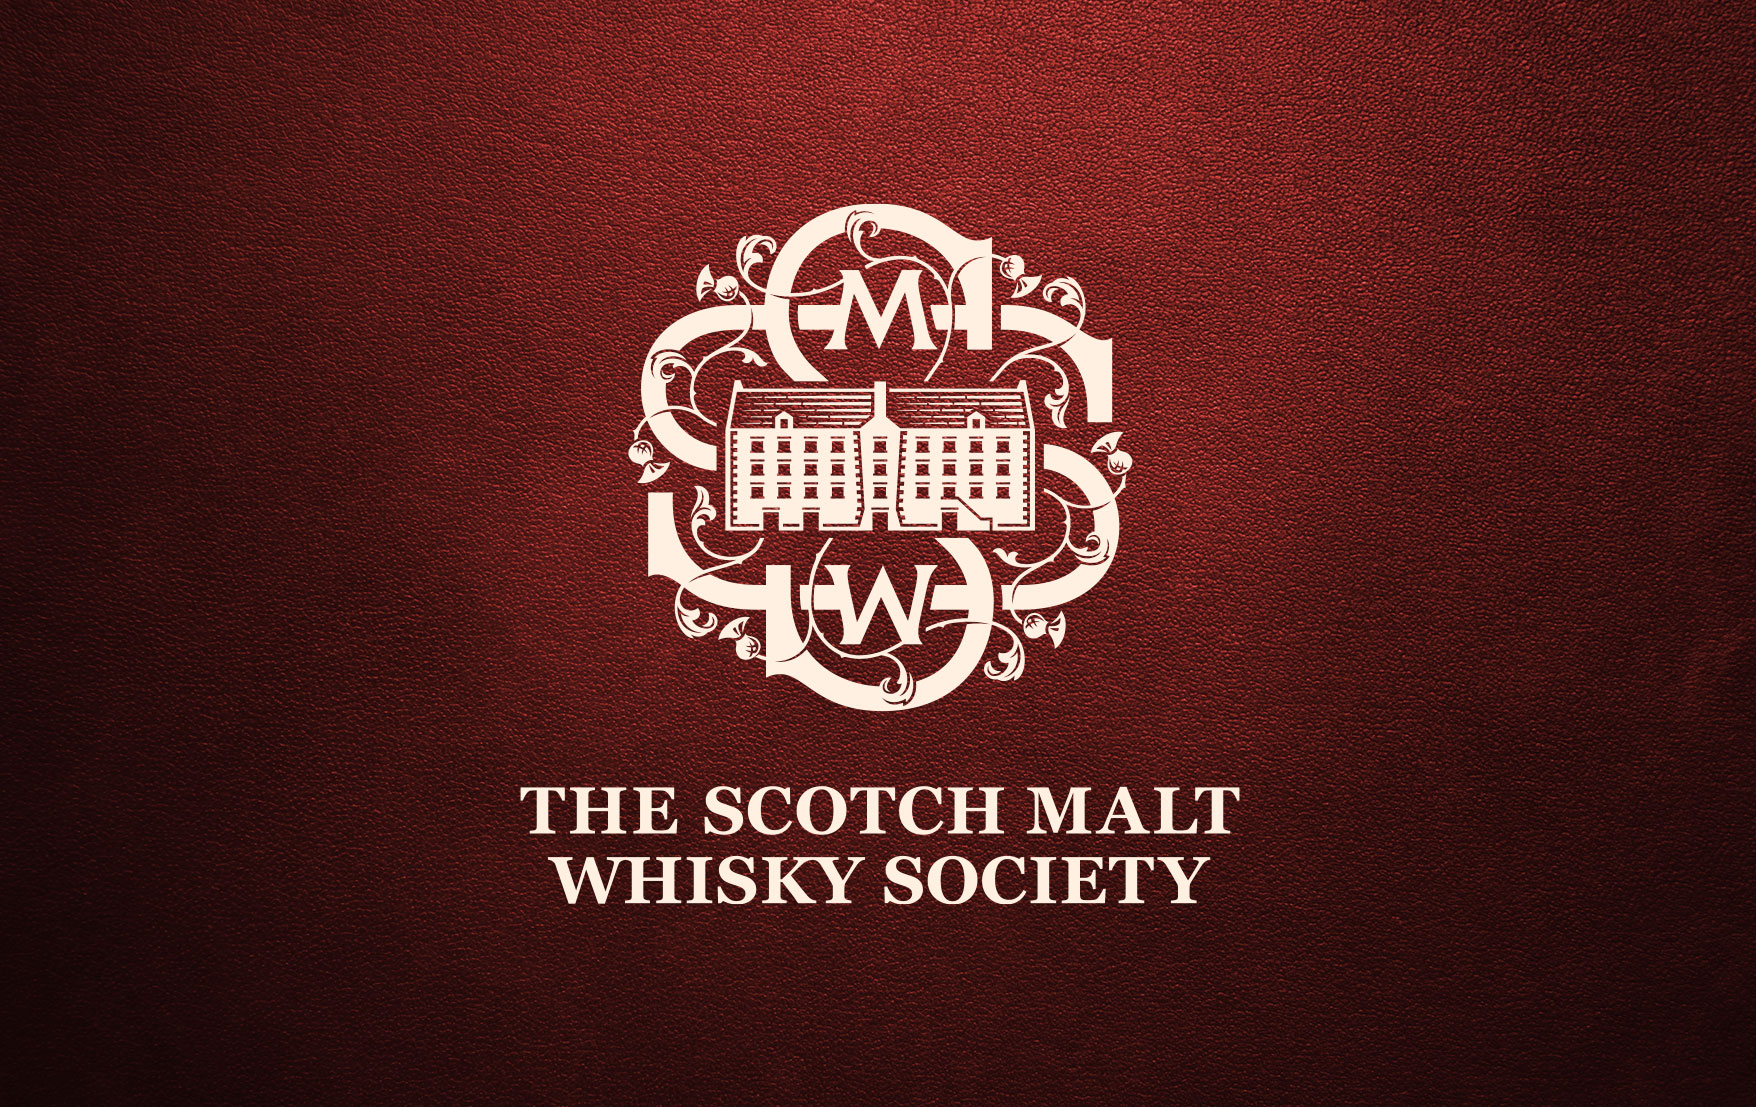 The Scotch Malt Whisky Society closes South Korea franchise agreement deal